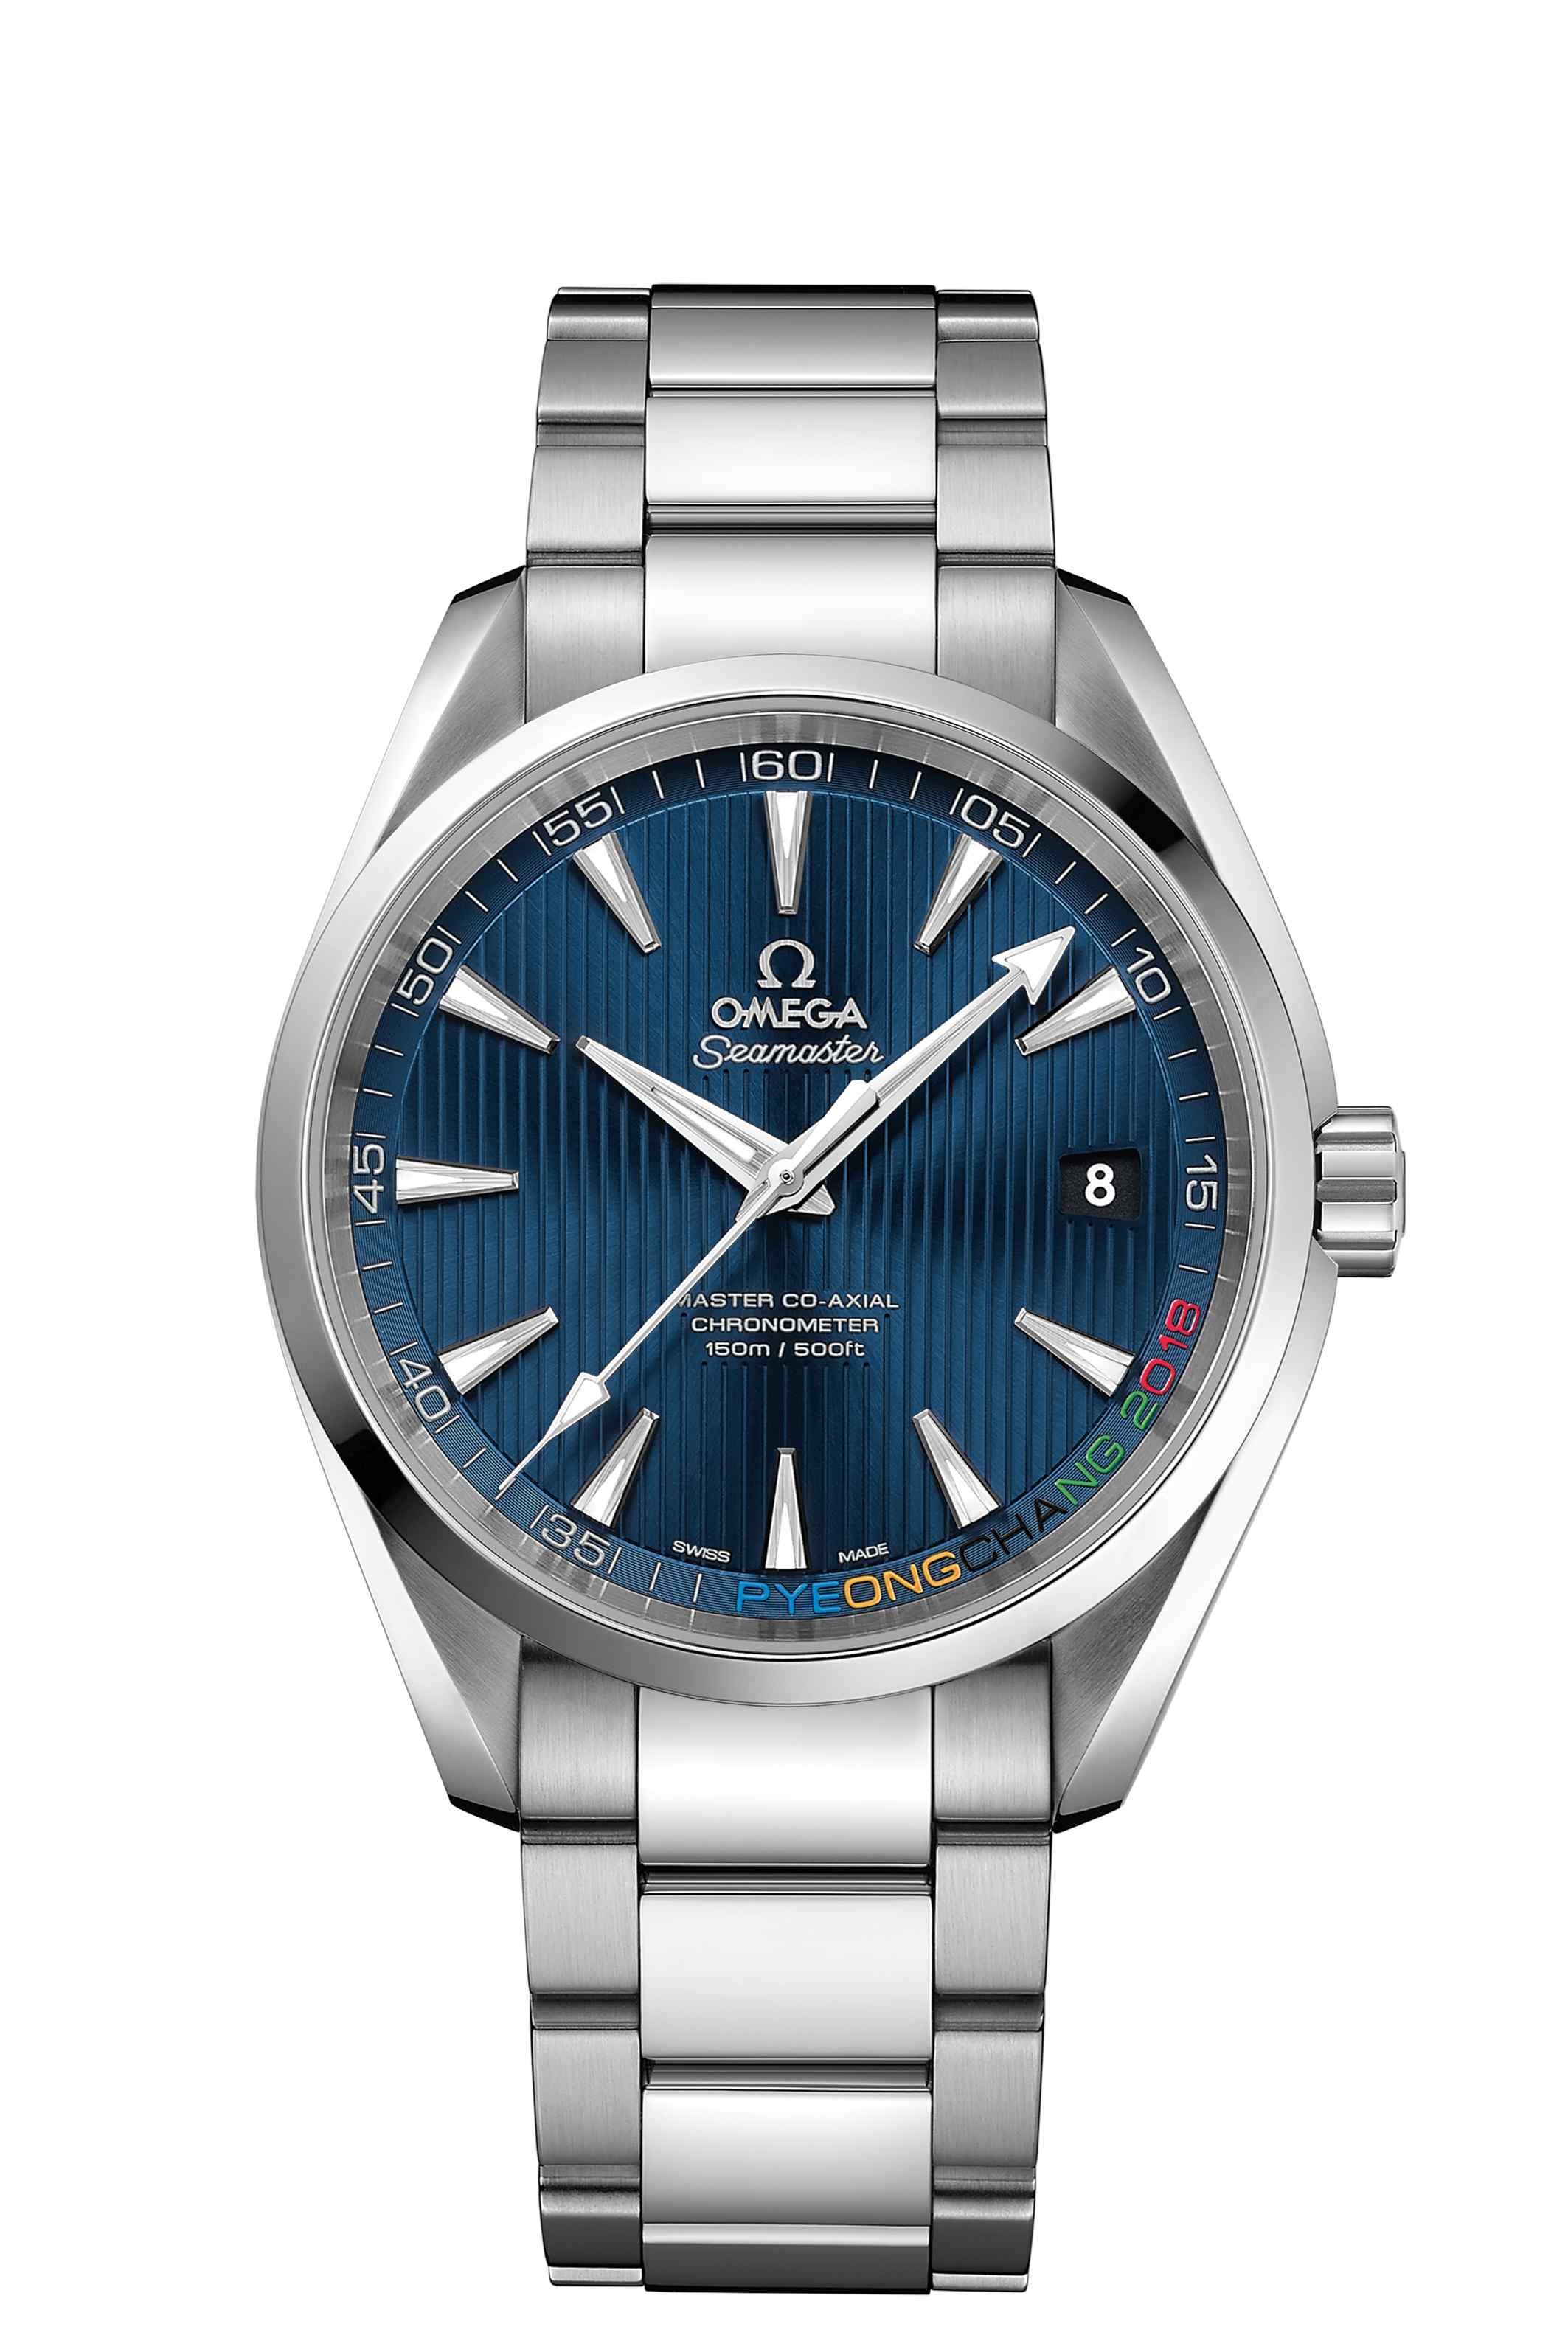 Read more about the article OMEGA SEAMASTER AQUA TERRA “PYEONGCHANG 2018” LIMITED EDITION